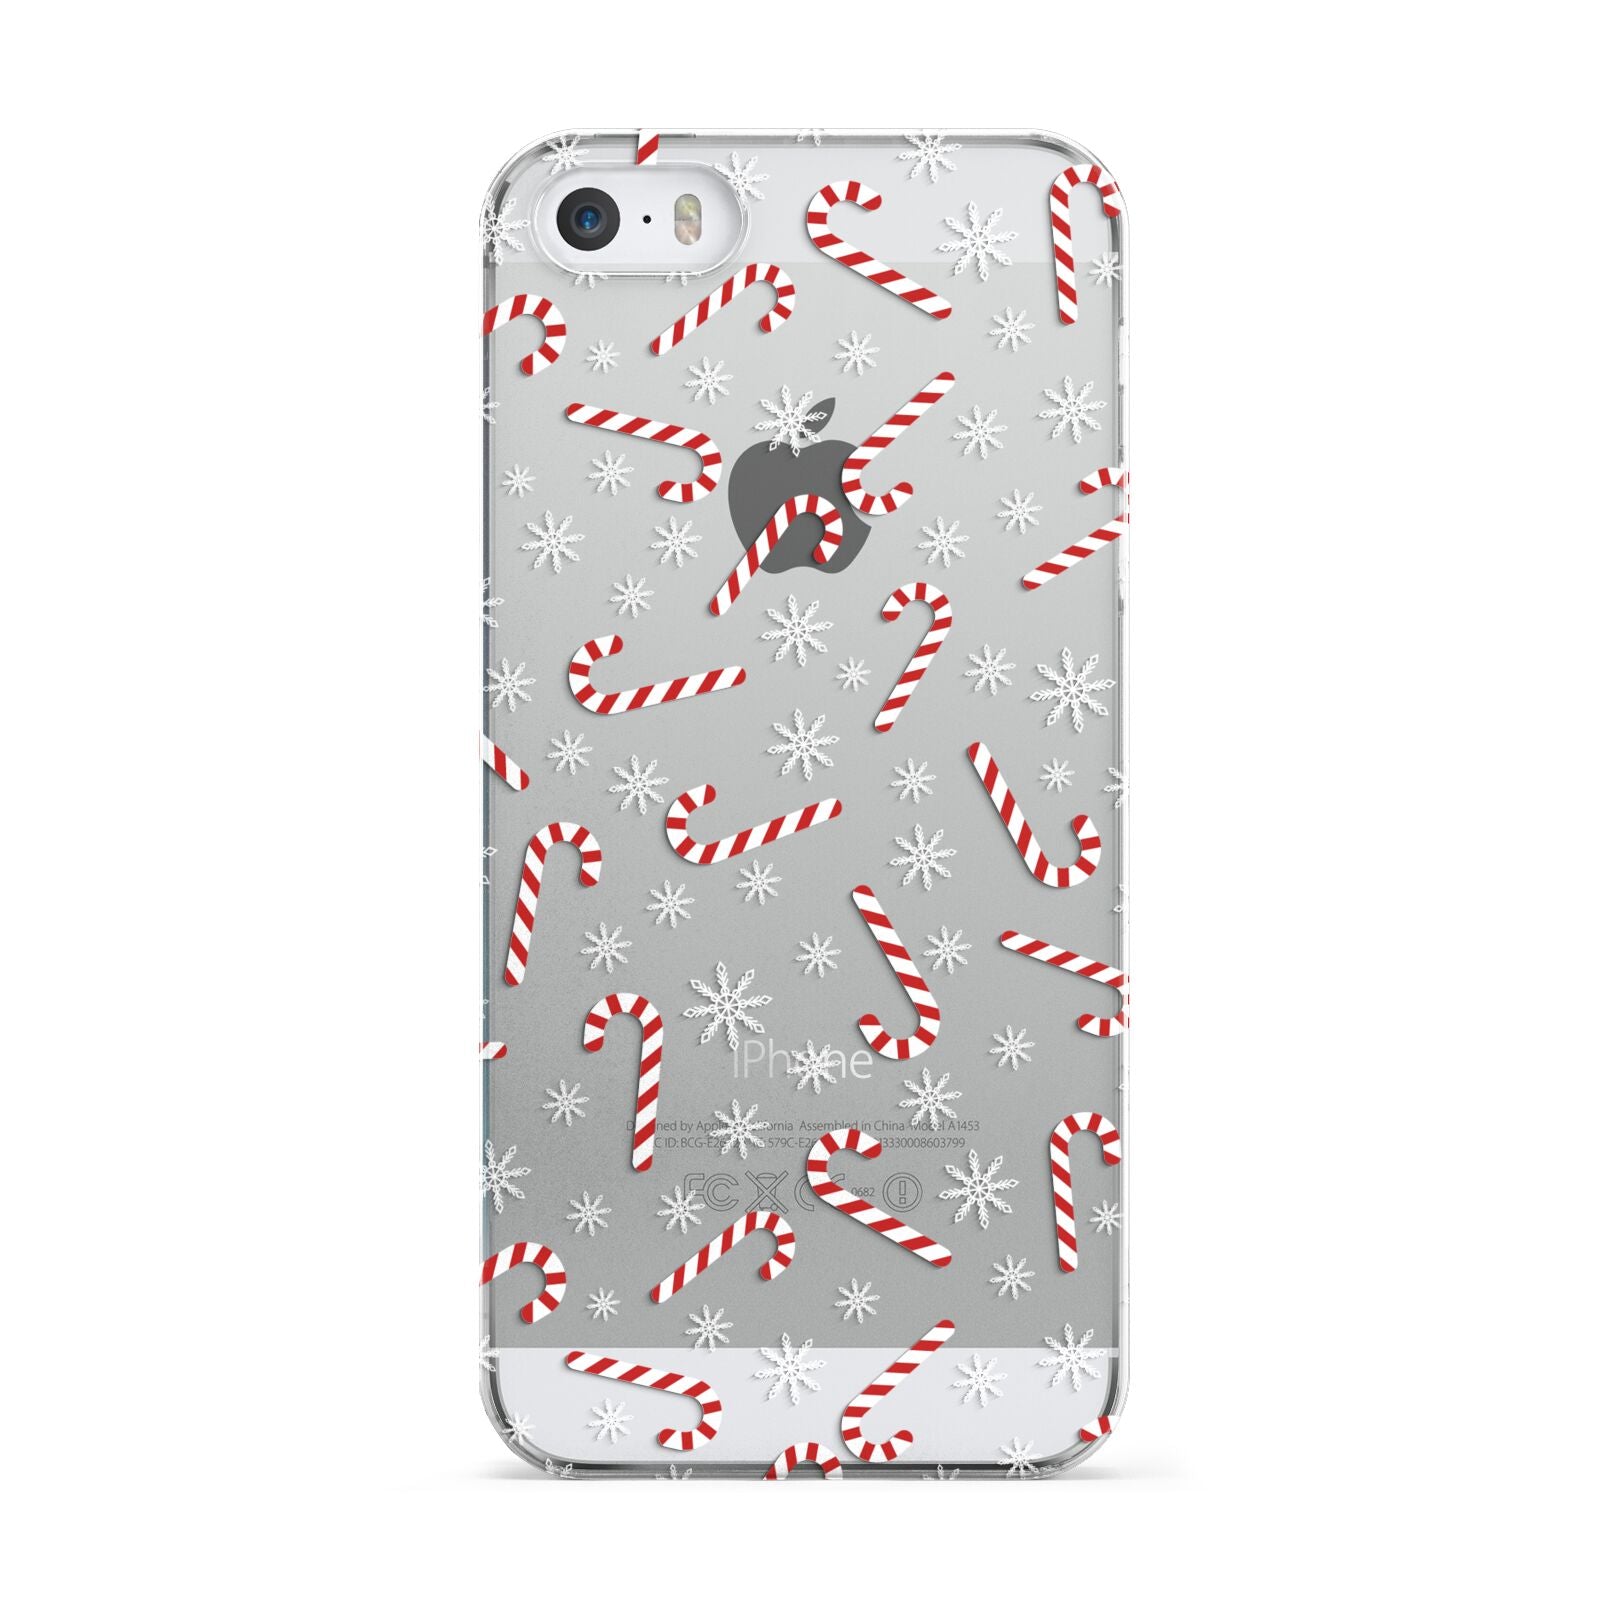 Candy Cane Apple iPhone 5 Case